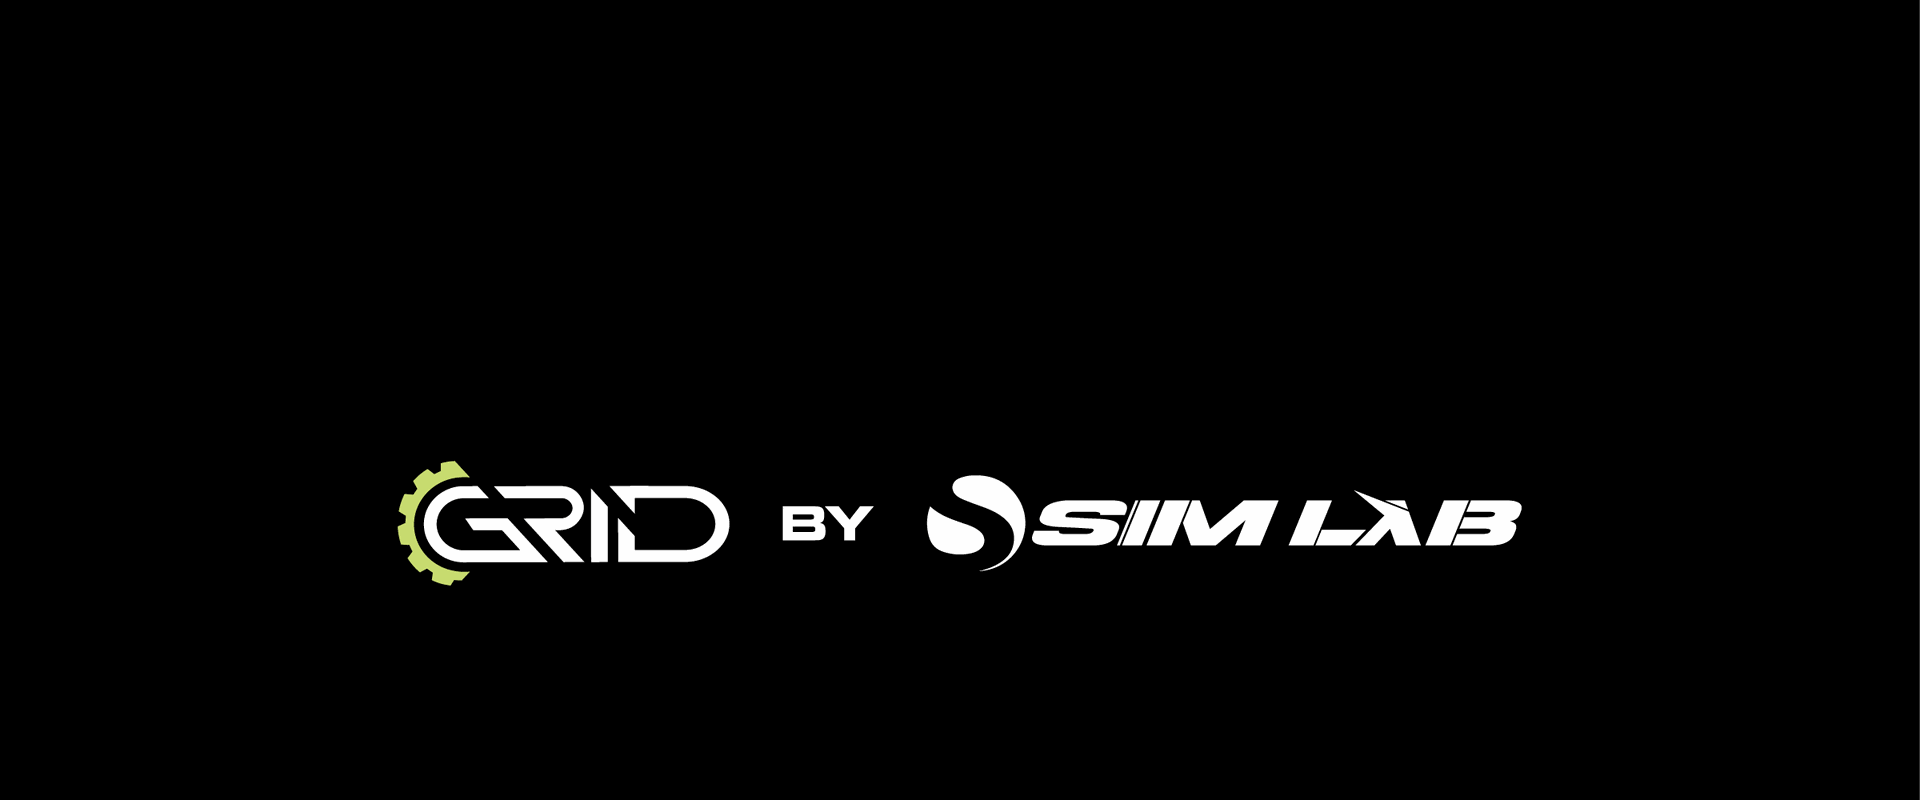 SIM-LAB B.V. and GRID ENGINEERING joining forces